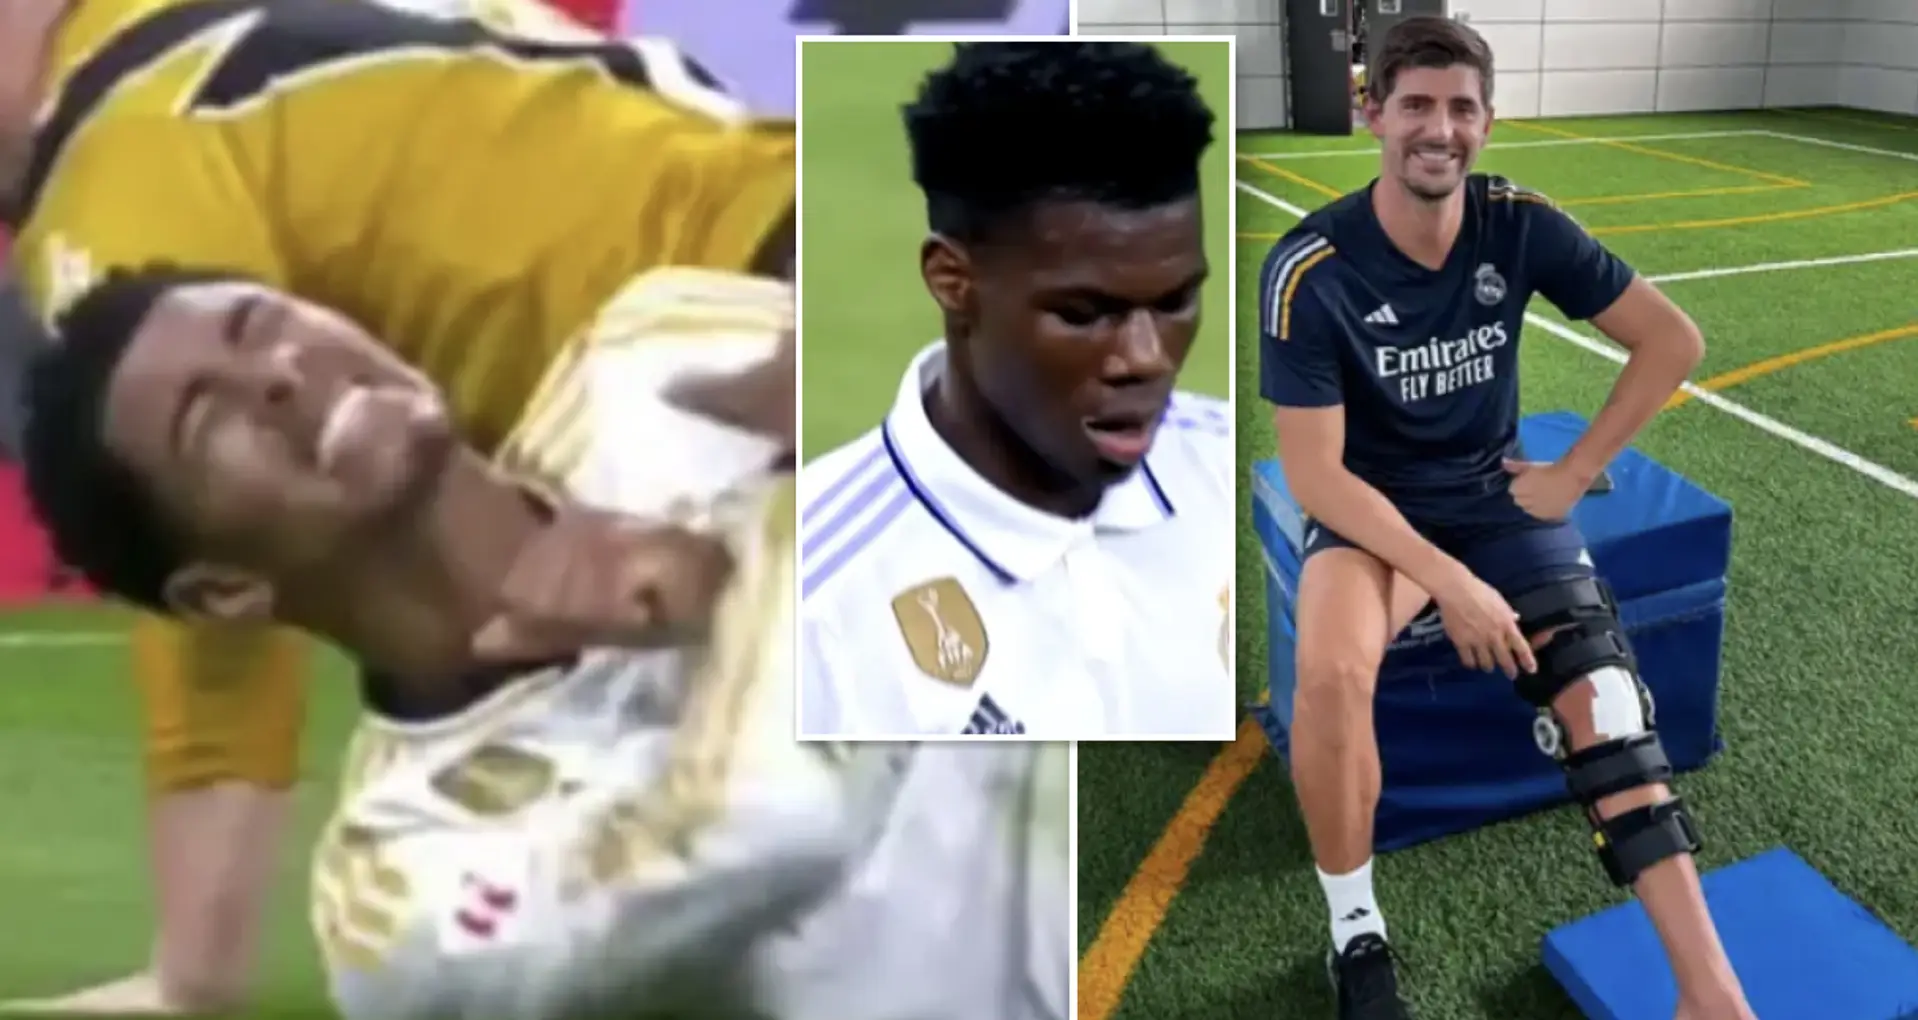 Bellingham, Tchouameni & more: Real Madrid's 7-man injury list with potential return dates